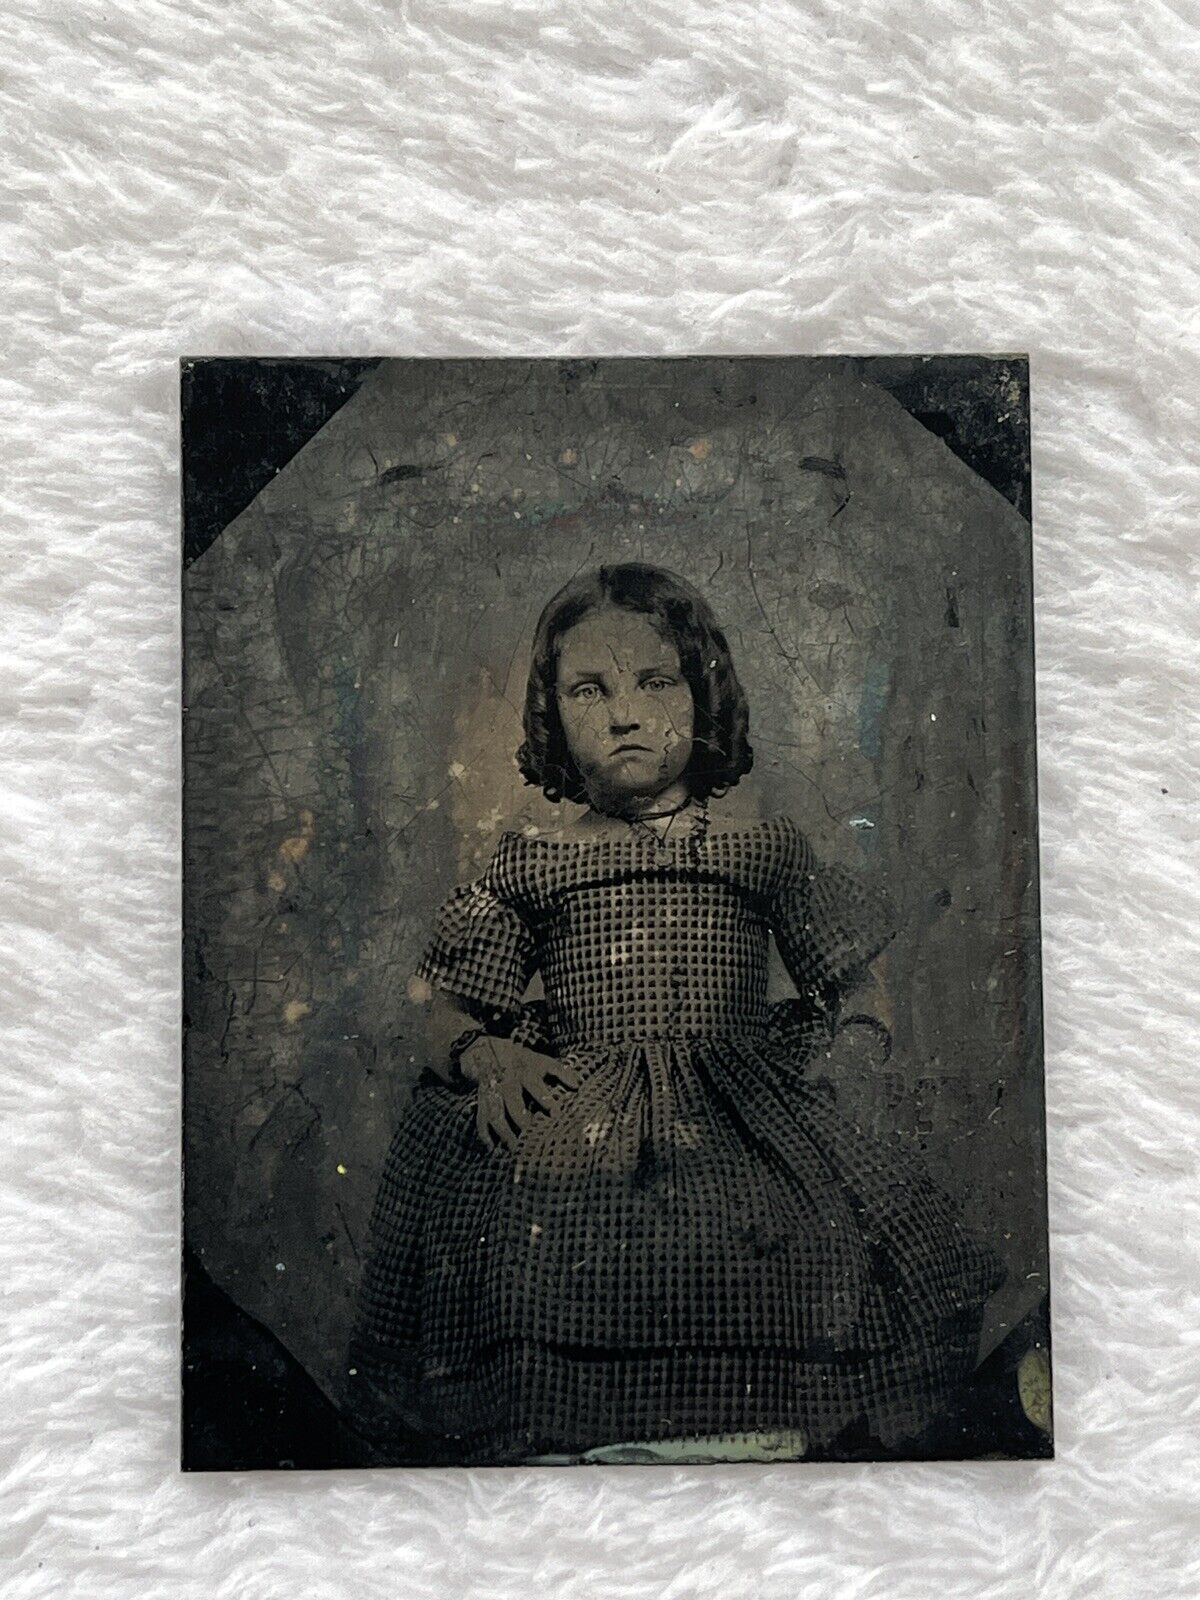 tintype of pretty young girl with amazing hair braids polka dots dress